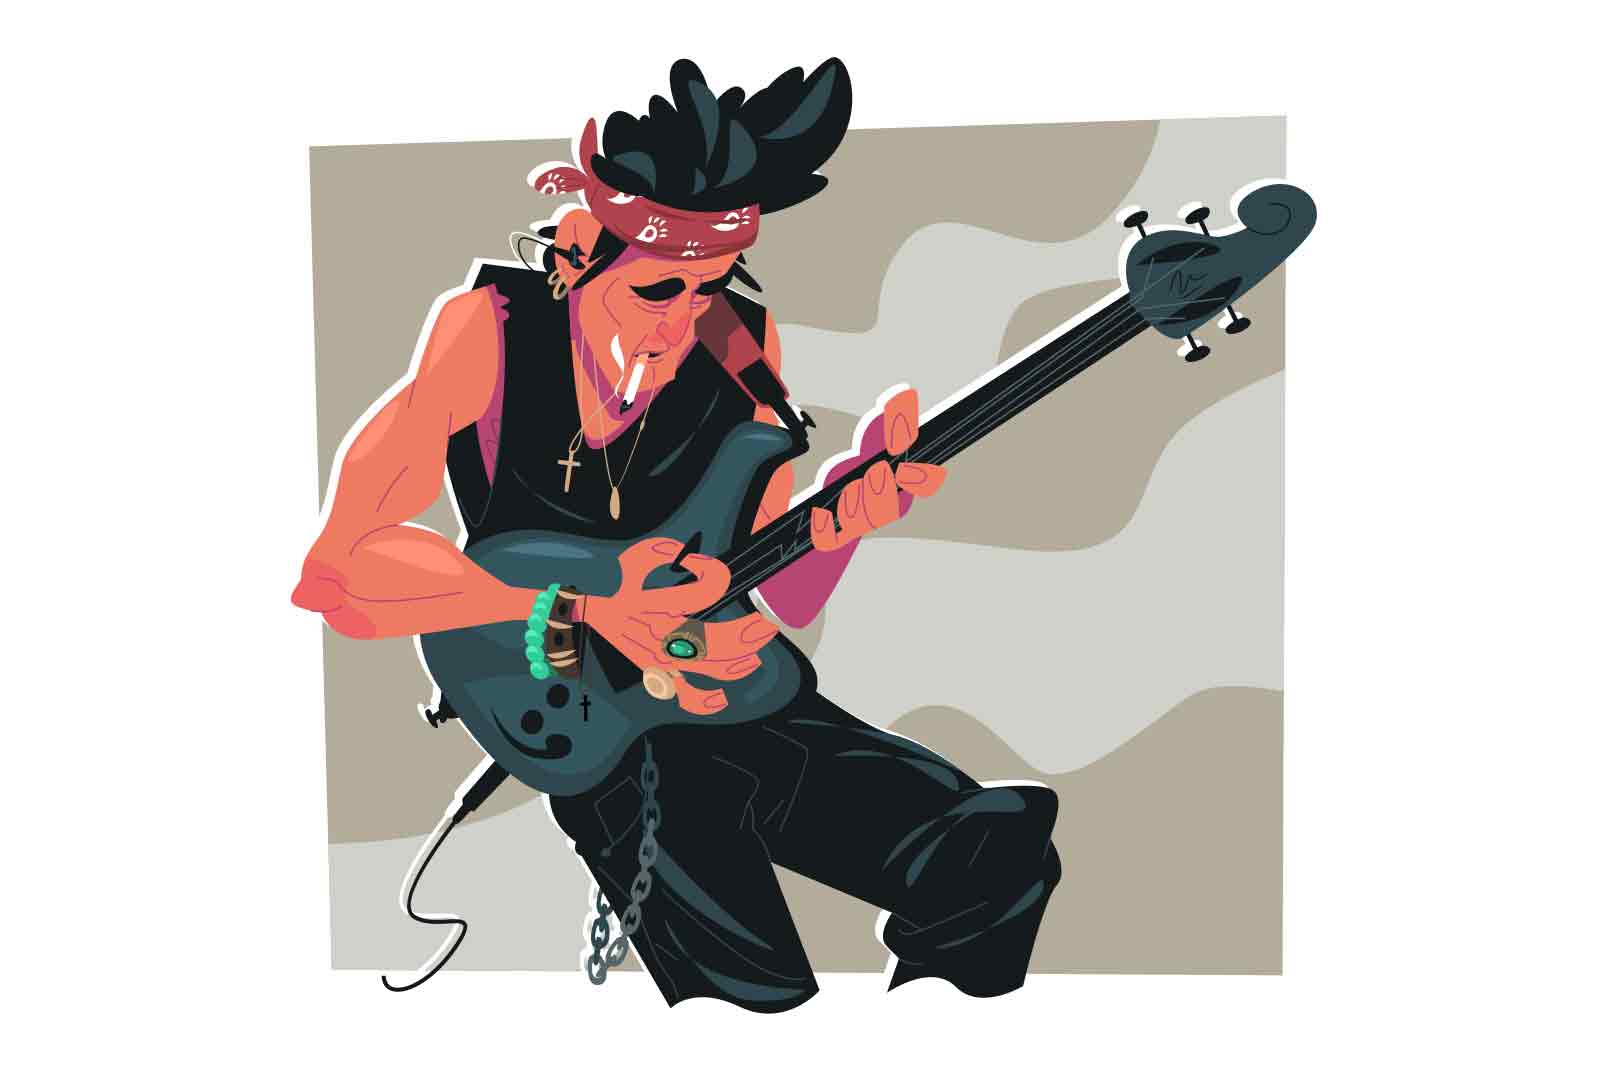 Musician with electric concert guitar vector illustration. Performing at rock music festival flat style concept